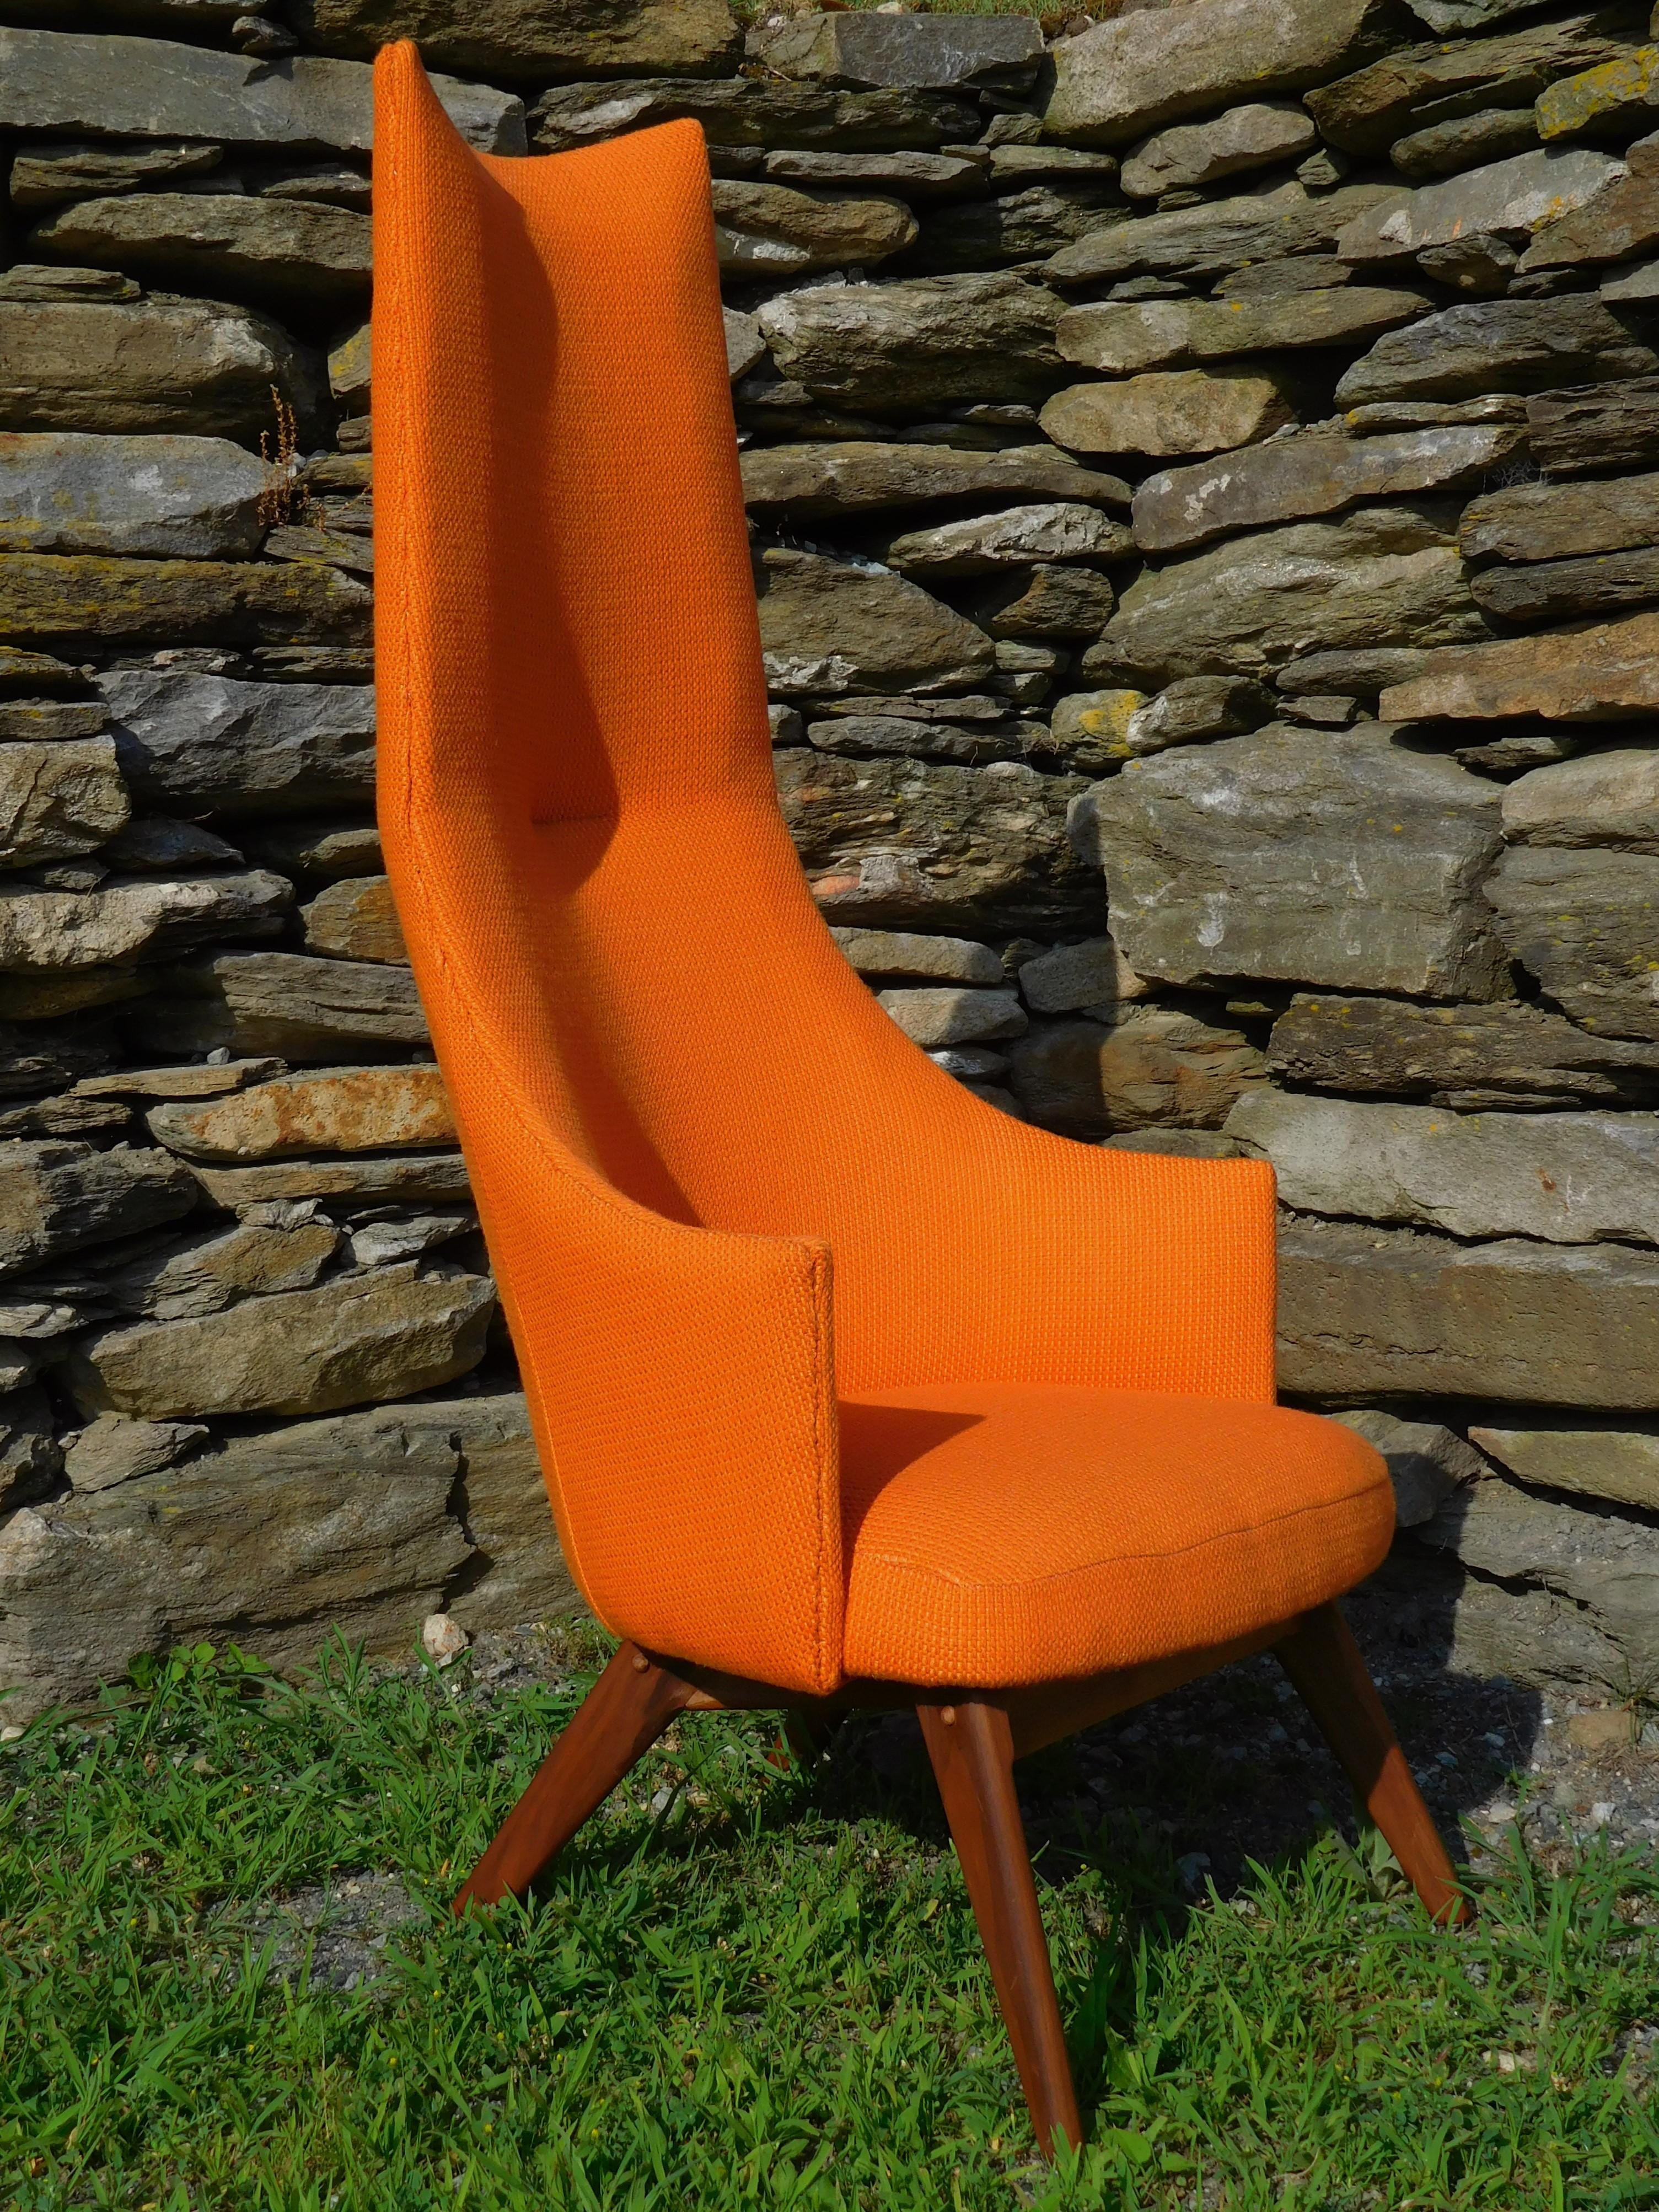 Polished Adrian Pearsall Atomic Age High Back Lounge Chair, circa 1955 For Sale